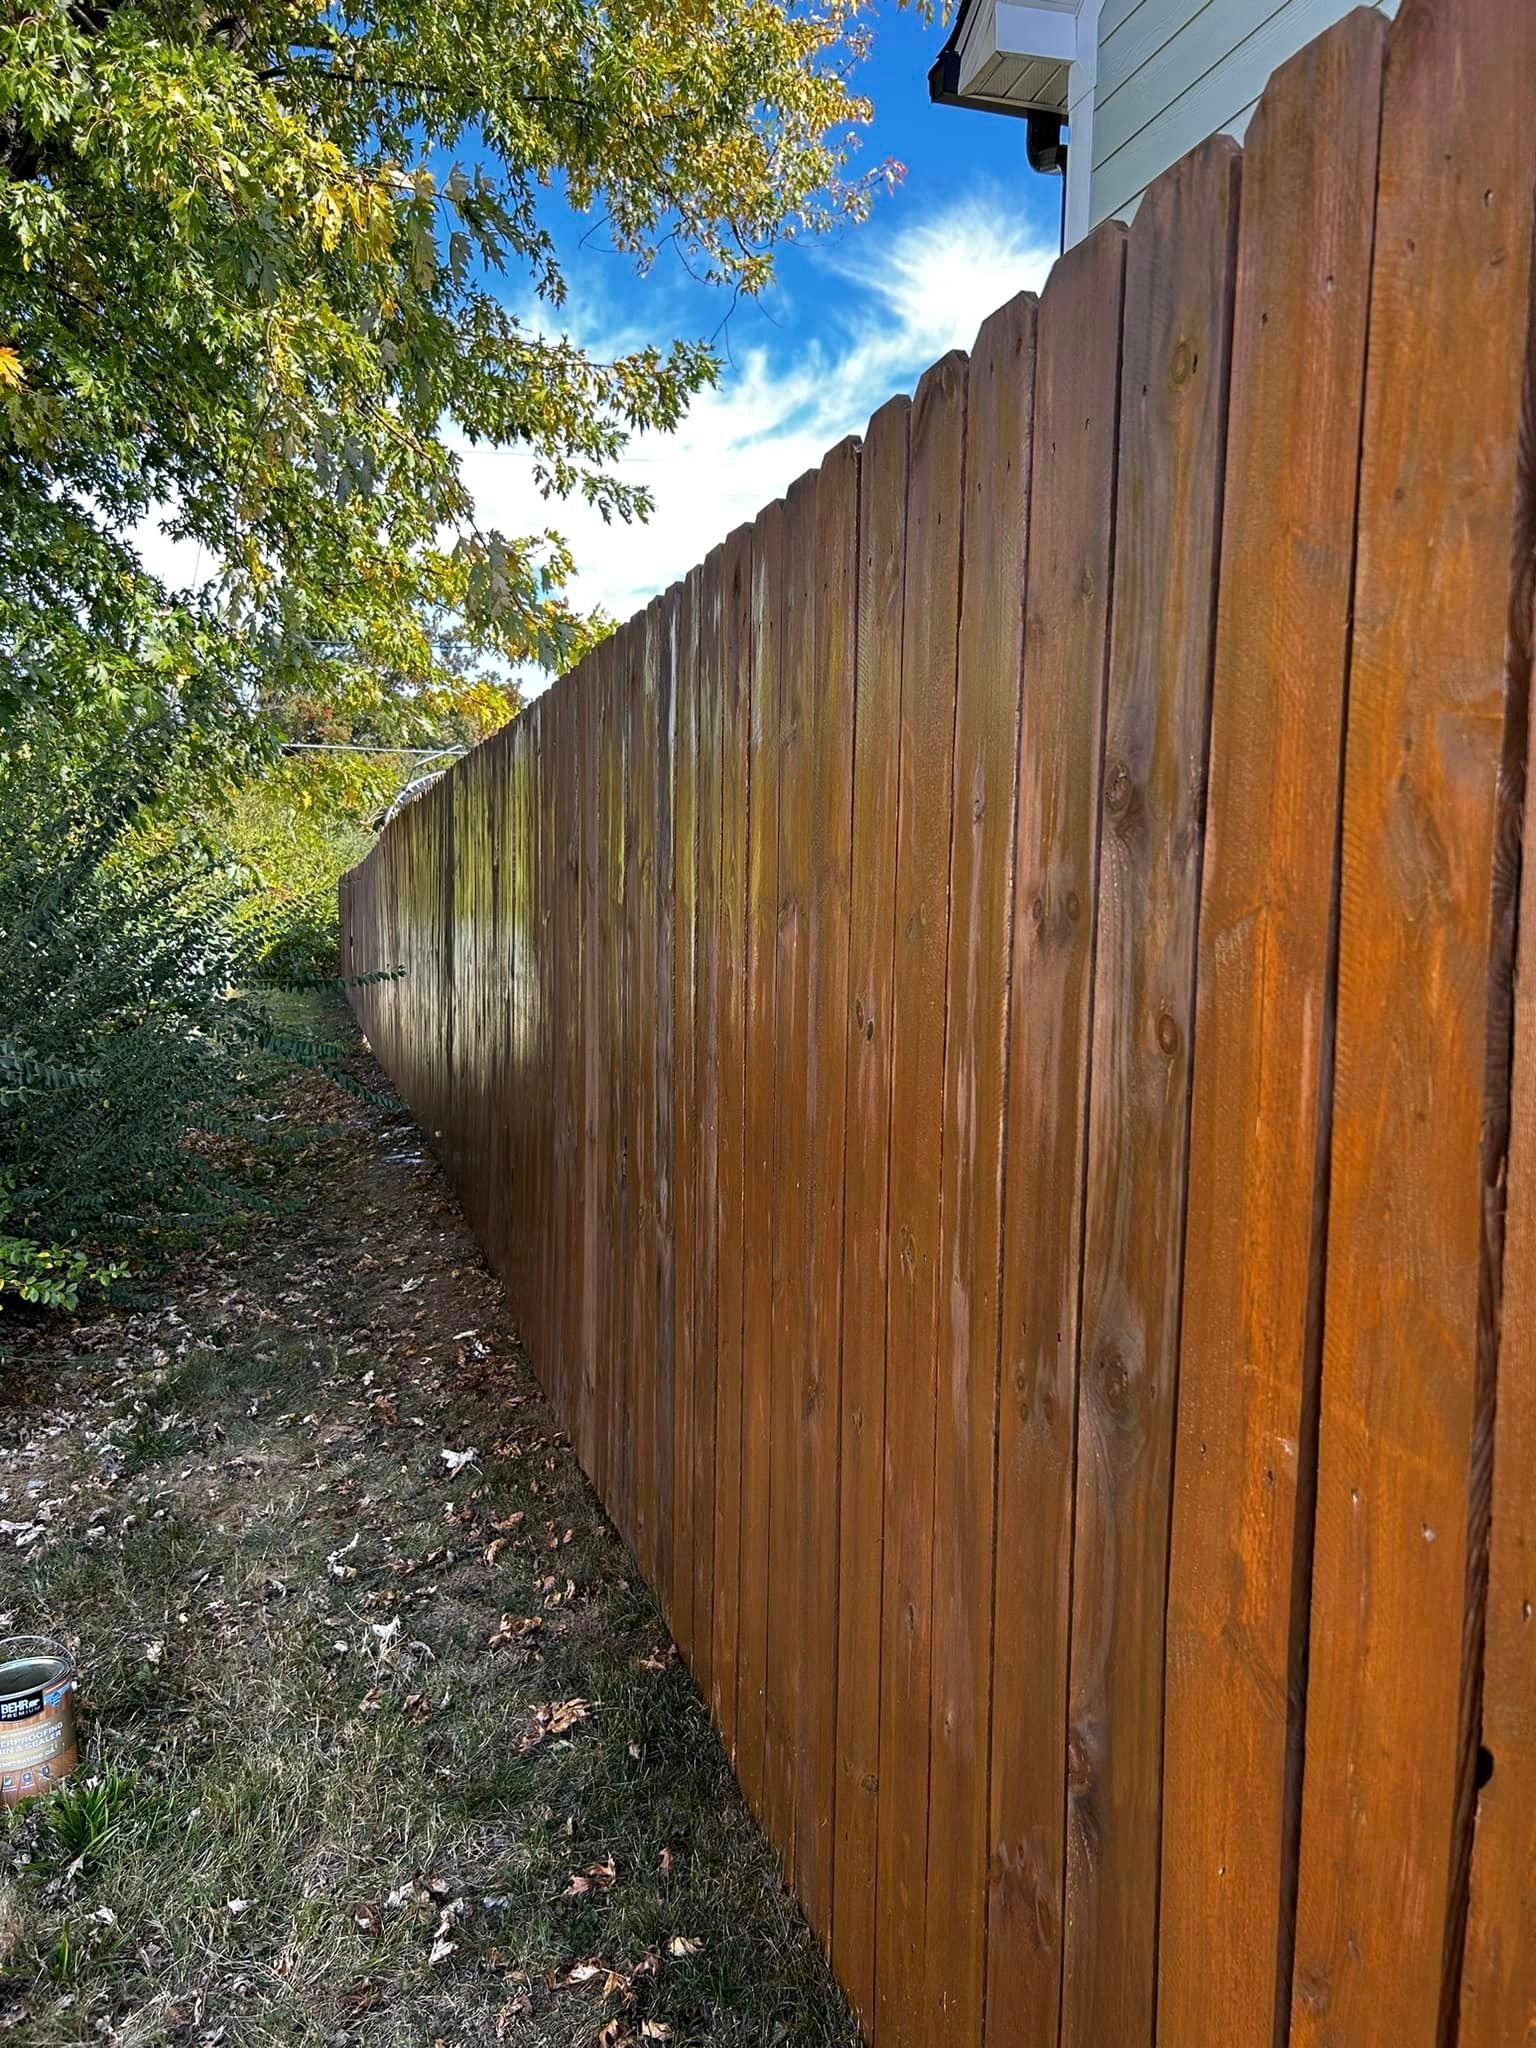 a wooden fence is surrounded by trees in a backyard .